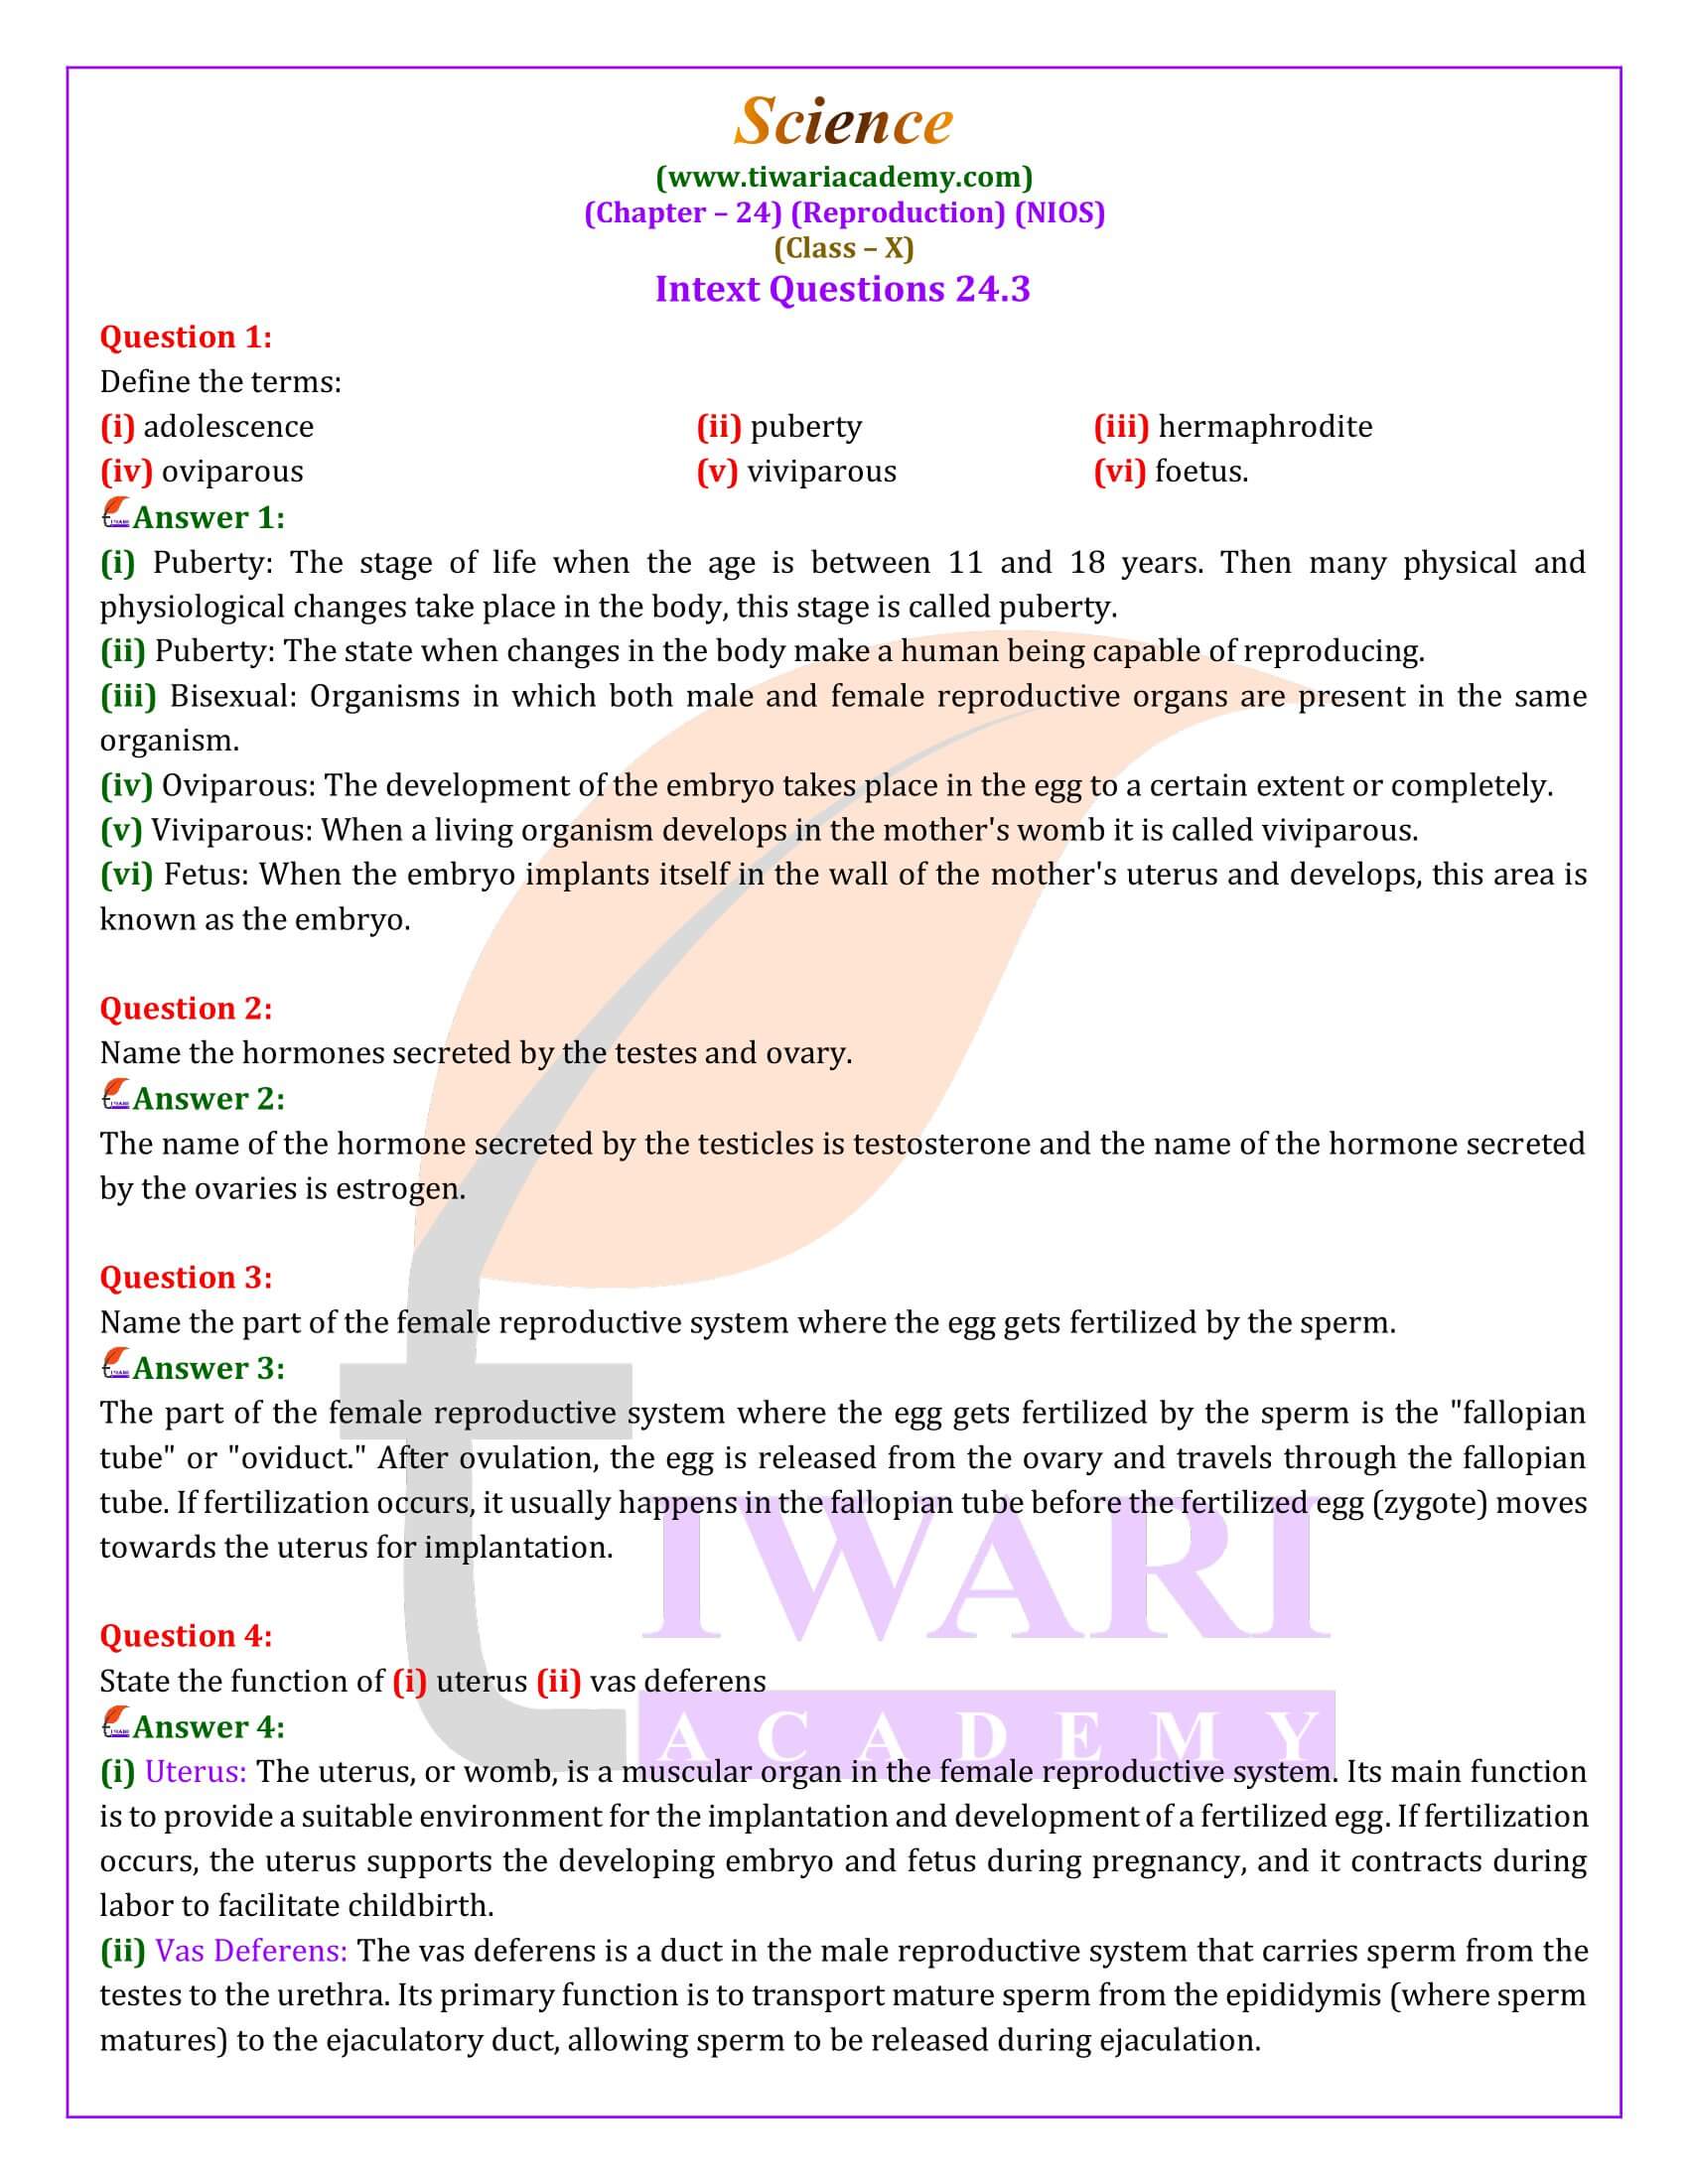 NIOS Class 10 Science Chapter 24 Life Processes III: Reproduction Solutions